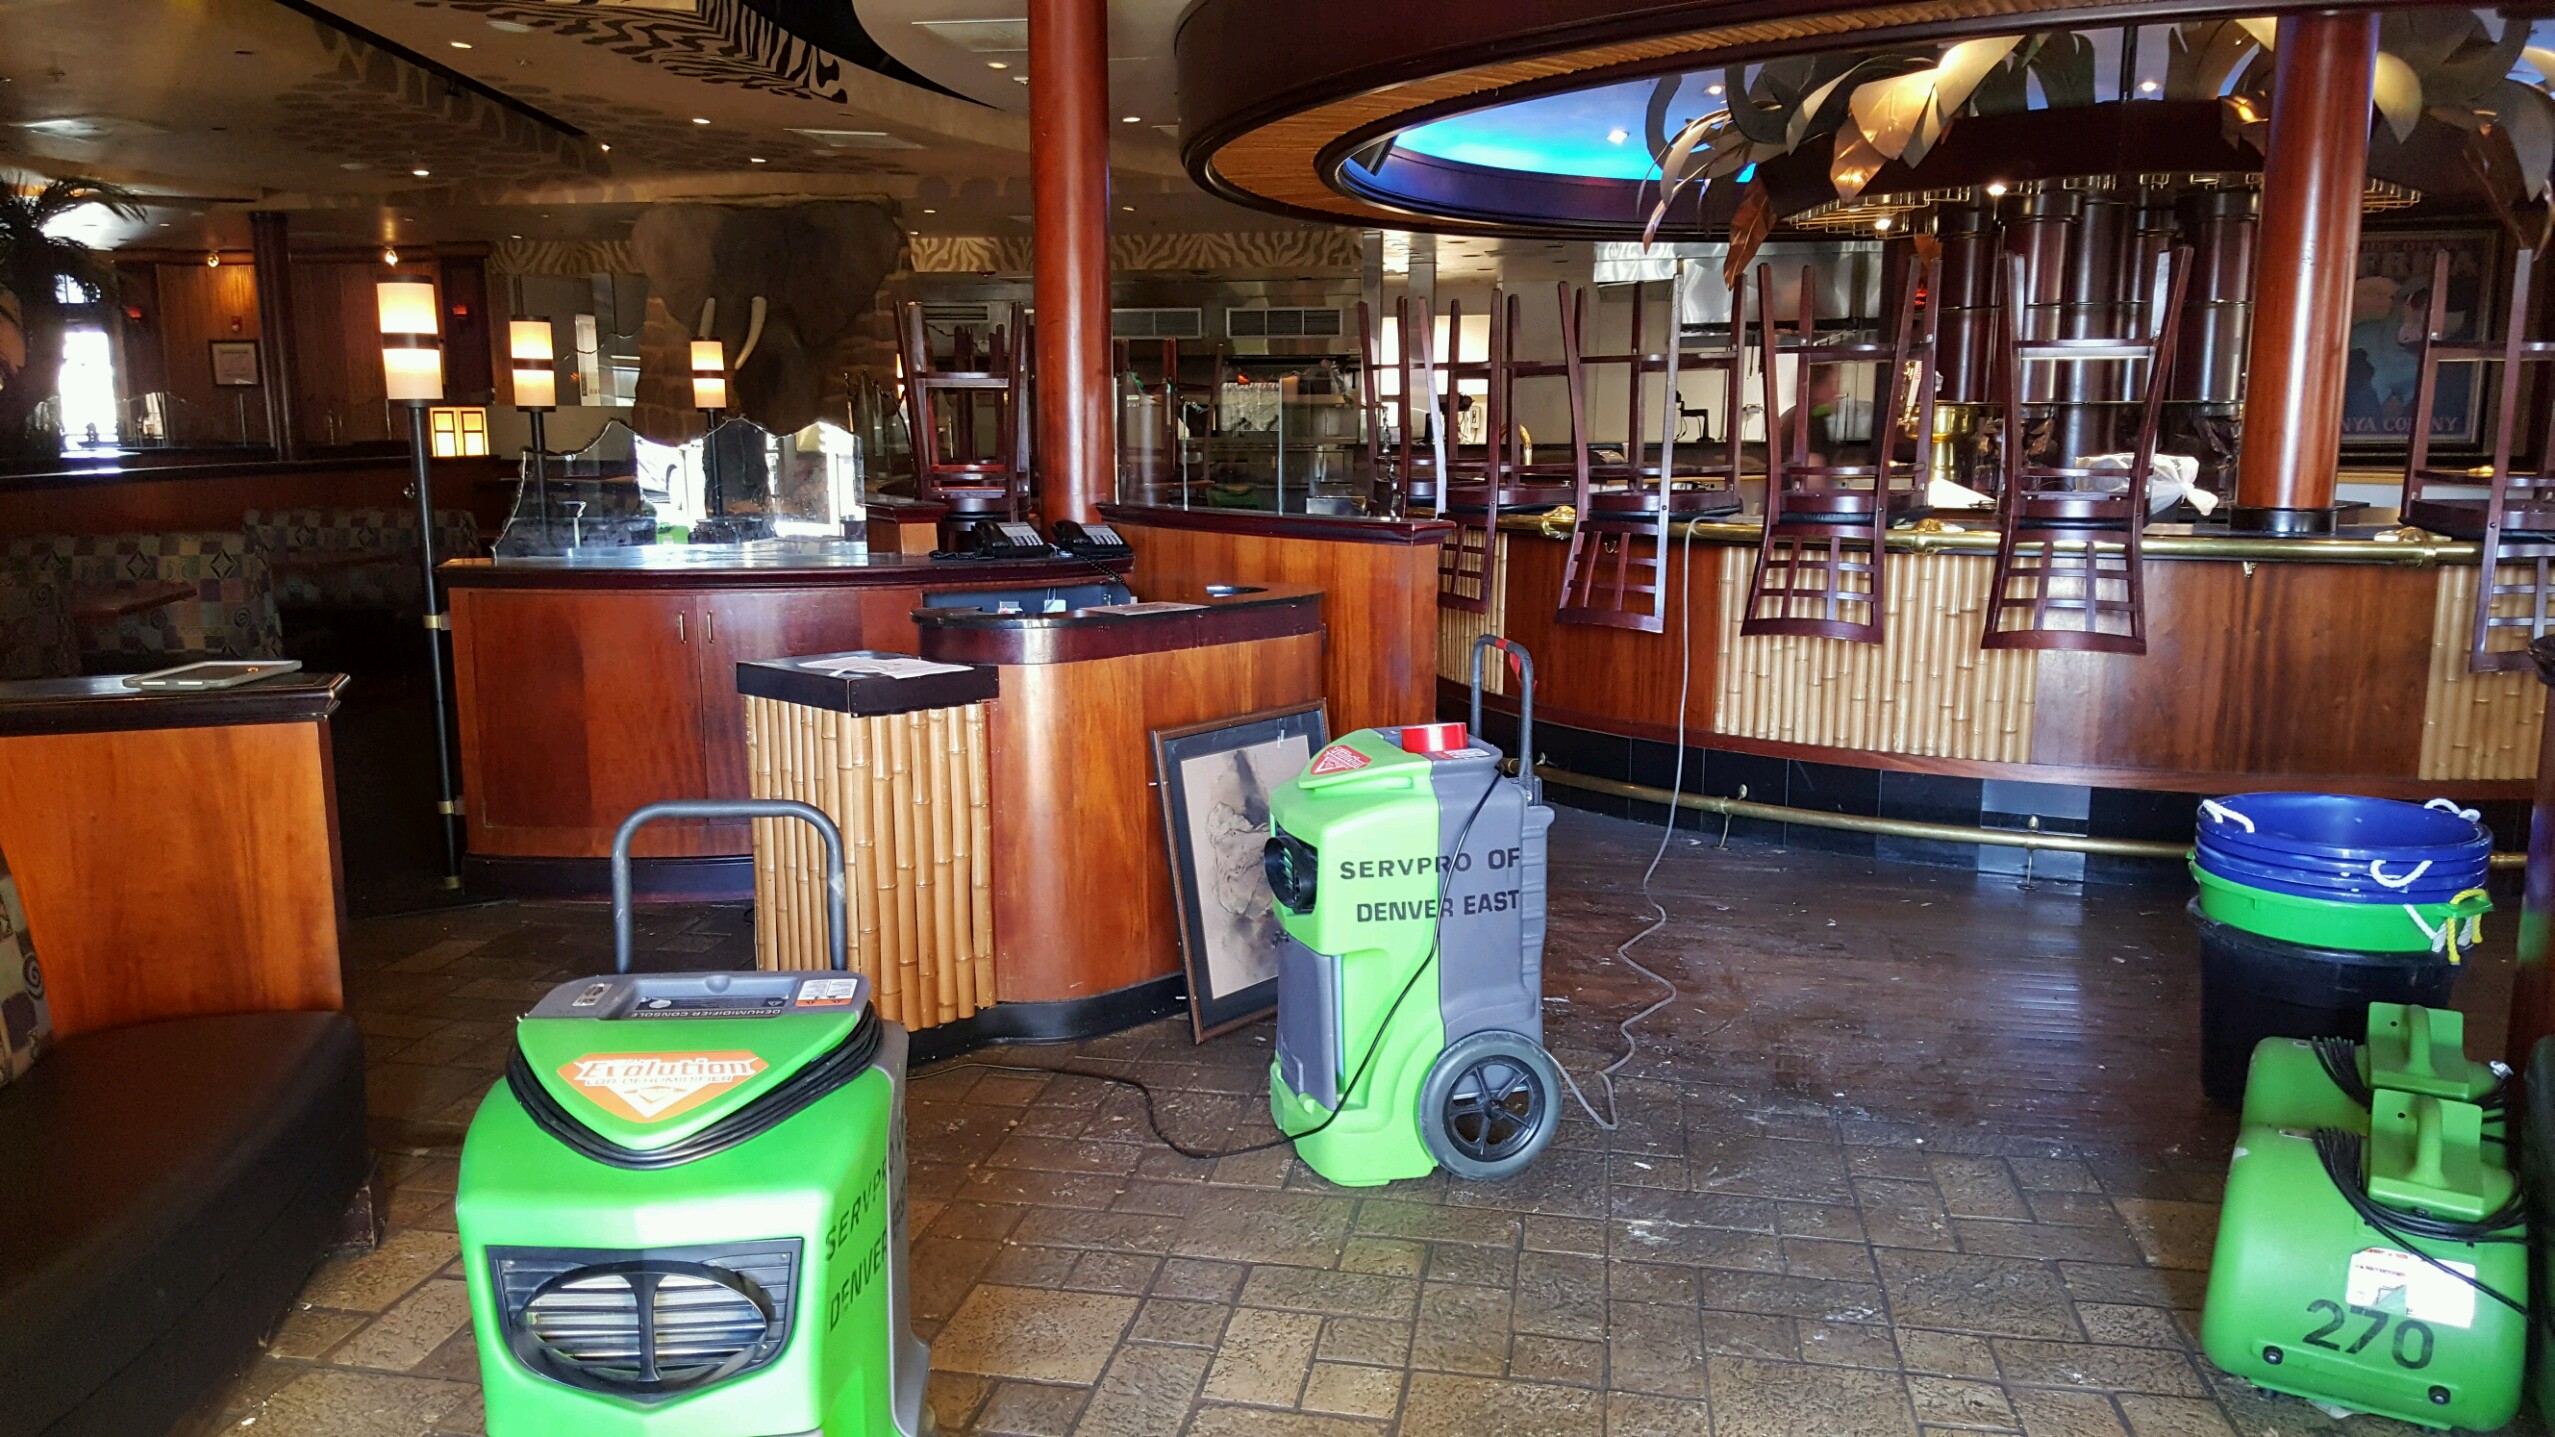 Received a call for for Water Cleanup at an abandoned restaurant in Denver. Our team was quick to respond to minimize damages and get cleaned.